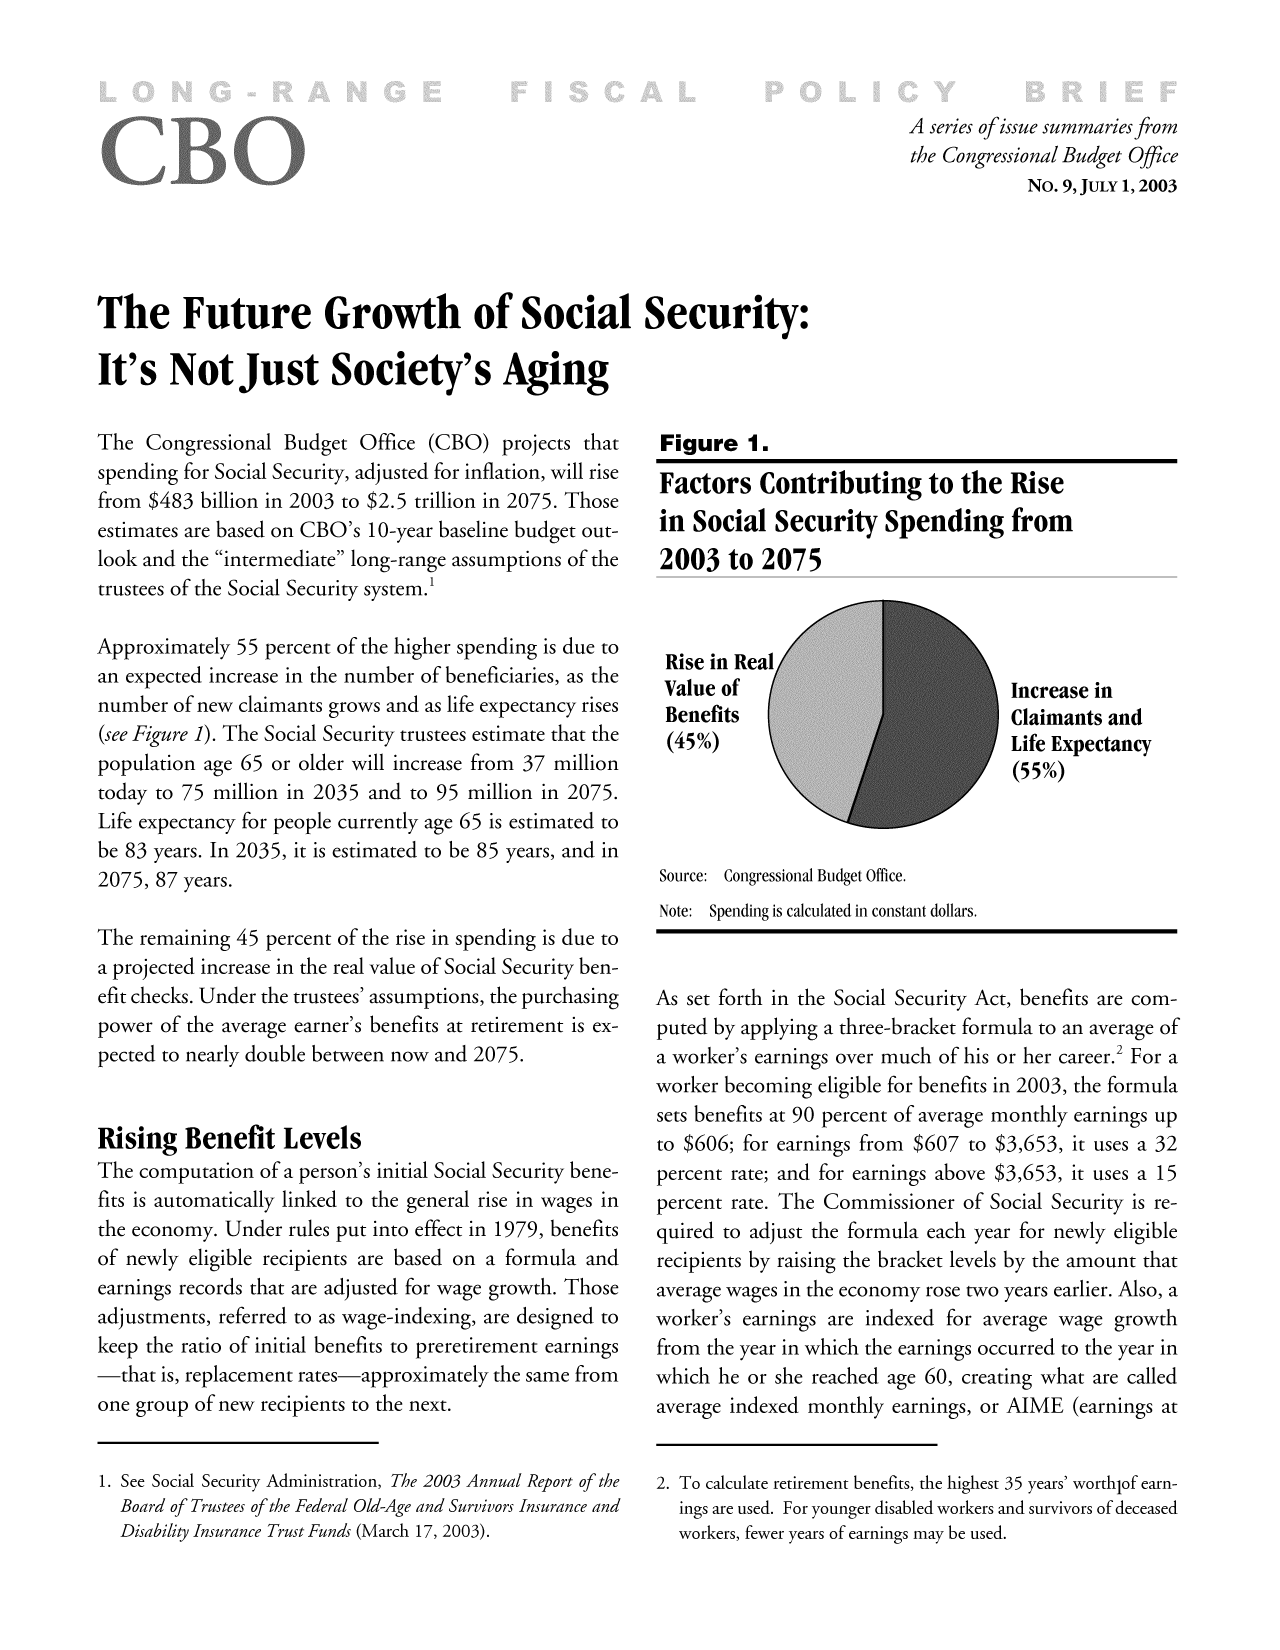 handle is hein.congrec/cbo8623 and id is 1 raw text is: A series of issue summaries from
the Congressional Budget Office
No. 9, JULY 1, 2003

The Future Growth of Social Security:
It's NotJust Society's Aging

The Congressional Budget Office (CBO) projects that
spending for Social Security, adjusted for inflation, will rise
from $483 billion in 2003 to $2.5 trillion in 2075. Those
estimates are based on CBO's 10-year baseline budget out-
look and the intermediate long-range assumptions of the
trustees of the Social Security system.!
Approximately 55 percent of the higher spending is due to
an expected increase in the number of beneficiaries, as the
number of new claimants grows and as life expectancy rises
(see Figure 1). The Social Security trustees estimate that the
population age 65 or older will increase from 37 million
today to 75 million in 2035 and to 95 million in 2075.
Life expectancy for people currently age 65 is estimated to
be 83 years. In 2035, it is estimated to be 85 years, and in
2075, 87 years.
The remaining 45 percent of the rise in spending is due to
a projected increase in the real value of Social Security ben-
efit checks. Under the trustees' assumptions, the purchasing
power of the average earner's benefits at retirement is ex-
pected to nearly double between now and 2075.
ising Benefit Levels
The computation of a person's initial Social Security bene-
fits is automatically linked to the general rise in wages in
the economy. Under rules put into effect in 1979, benefits
of newly eligible recipients are based on a formula and
earnings records that are adjusted for wage growth. Those
adjustments, referred to as wage-indexing, are designed to
keep the ratio of initial benefits to preretirement earnings
-that is, replacement rates-approximately the same from
one group of new recipients to the next.

Figure 1.
Factors Contributing to the Rise
in Social Security Spending from
2003 to 2075

Rise in R~
Value of
Benefits
(450)

Increase in
Claimants and
Life Expectancy
(550)

Source: Congressional Budget Office.
Note: Spending is calculated in constant dollars.
As set forth in the Social Security Act, benefits are com-
puted by applying a three-bracket formula to an average of
a worker's earnings over much of his or her career.2 For a
worker becoming eligible for benefits in 2003, the formula
sets benefits at 90 percent of average monthly earnings up
to $606; for earnings from $607 to $3,653, it uses a 32
percent rate; and for earnings above $3,653, it uses a 15
percent rate. The Commissioner of Social Security is re-
quired to adjust the formula each year for newly eligible
recipients by raising the bracket levels by the amount that
average wages in the economy rose two years earlier. Also, a
worker's earnings are indexed for average wage growth
from the year in which the earnings occurred to the year in
which he or she reached age 60, creating what are called
average indexed monthly earnings, or AIME (earnings at

1See Social Security Administration, The 2003 Annual Report of the
Board of Trustees of the Federal Old-Age and Survivors Insurance and
Diaility Insurance Trust Punds (March 17, 2003).

2.To calculate retirement benefits, the highest 35 years' worthlof earn-
ings are used. For younger disabled workers and survivors of deceased
workers, fewer years of earnings may be used.


